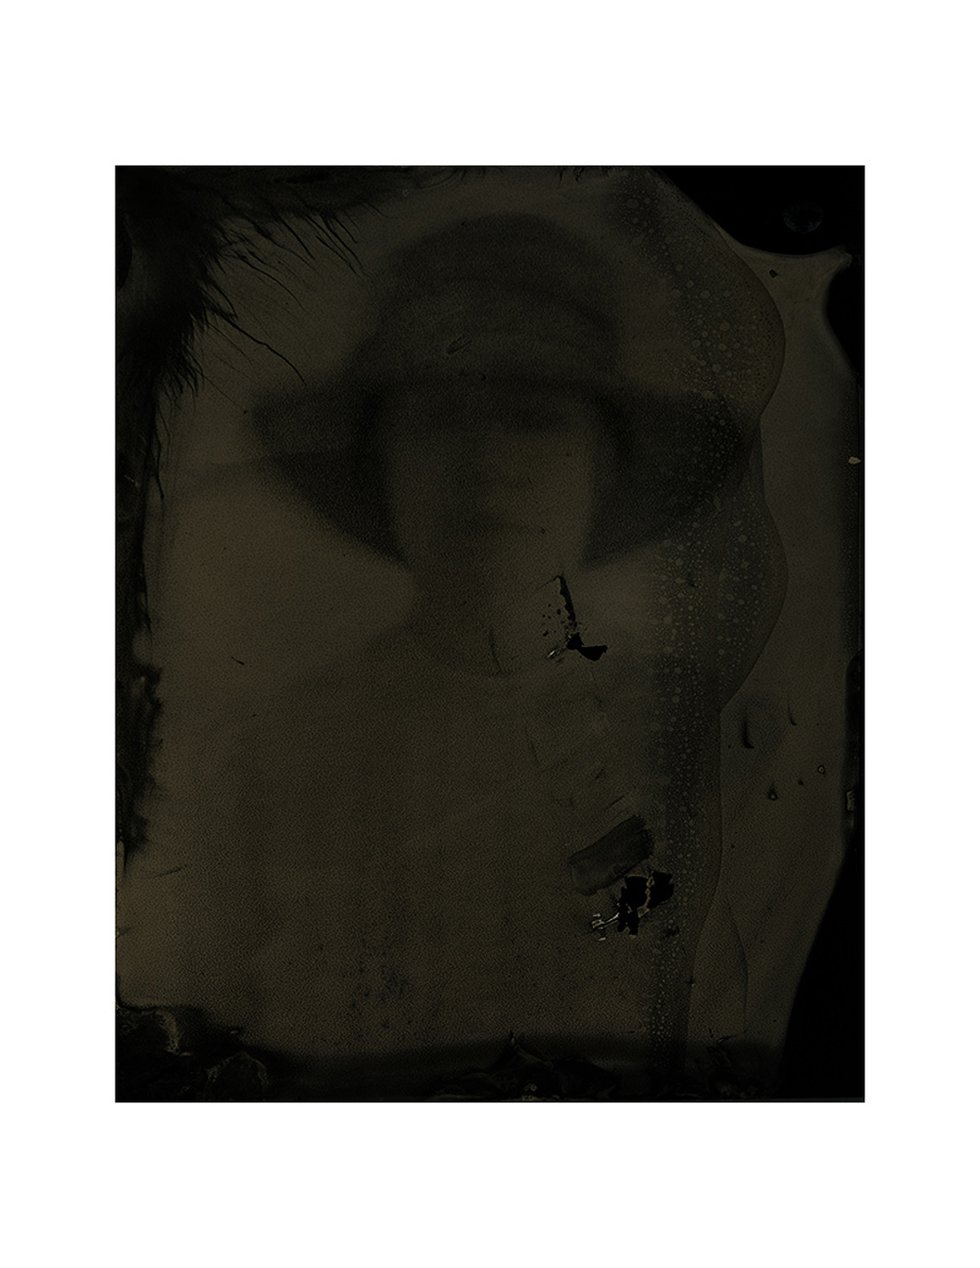 Jennifer Crane, "Untitled,” from the series "Outlaw," 2015